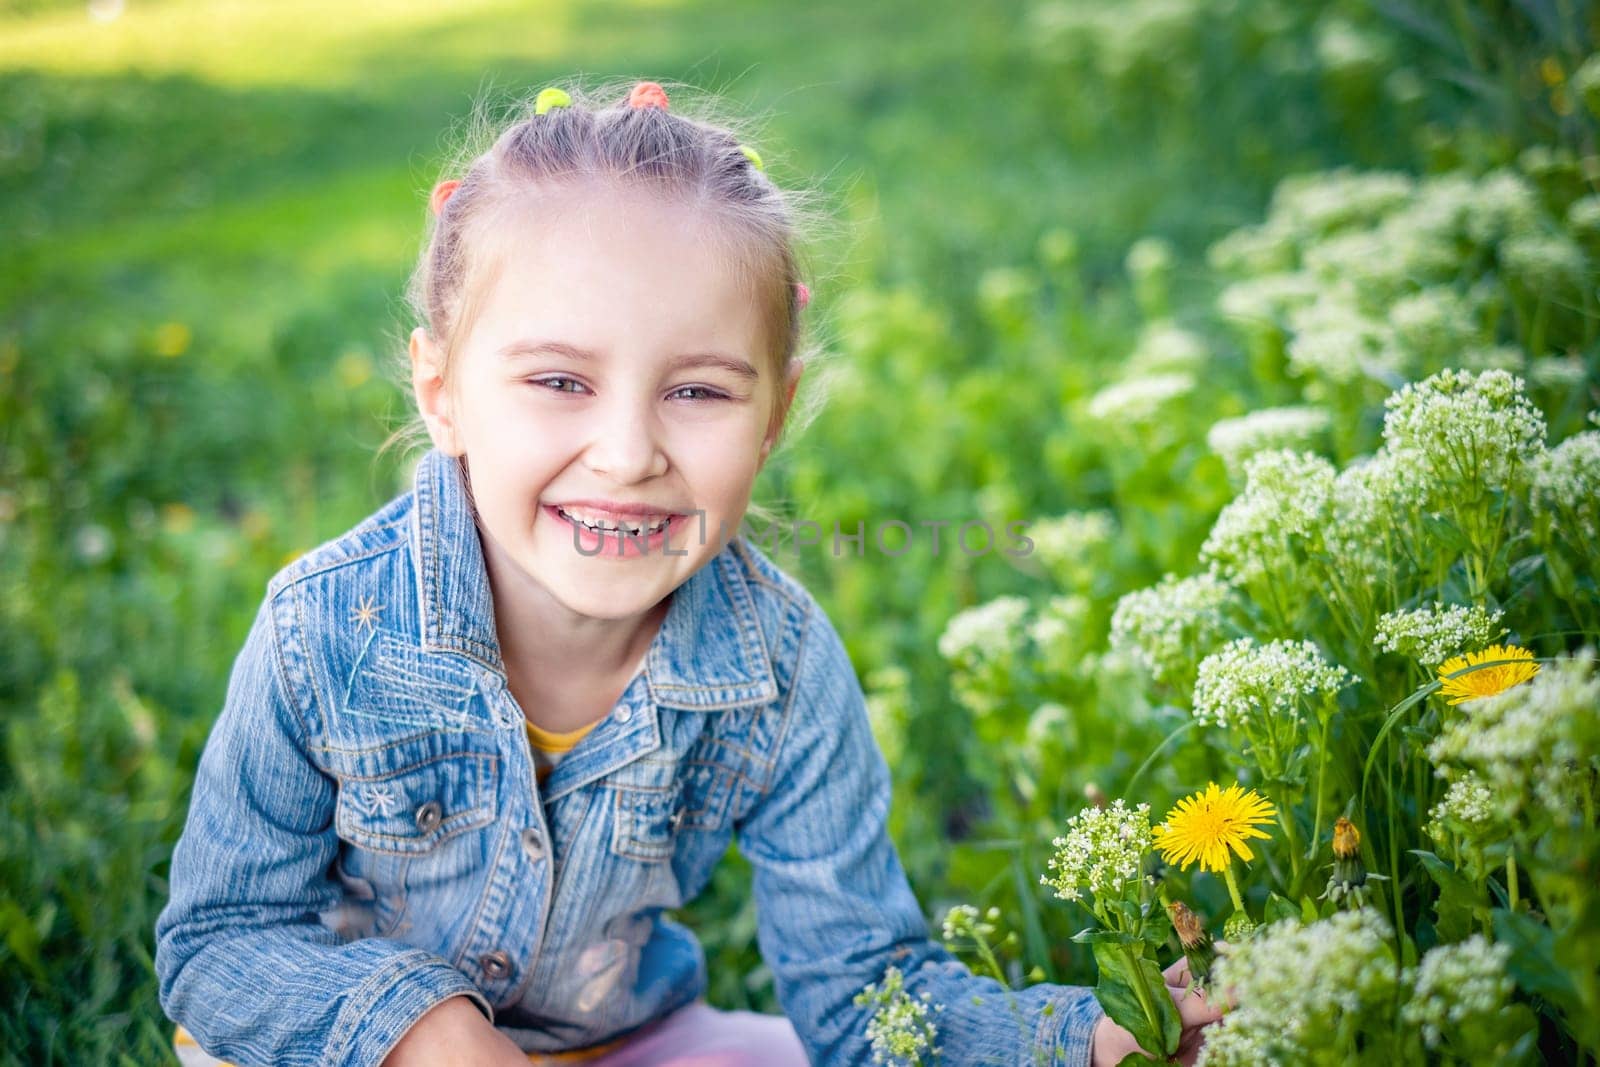 Smiling attractive girl sitting near grass and flowers in jeans jacket